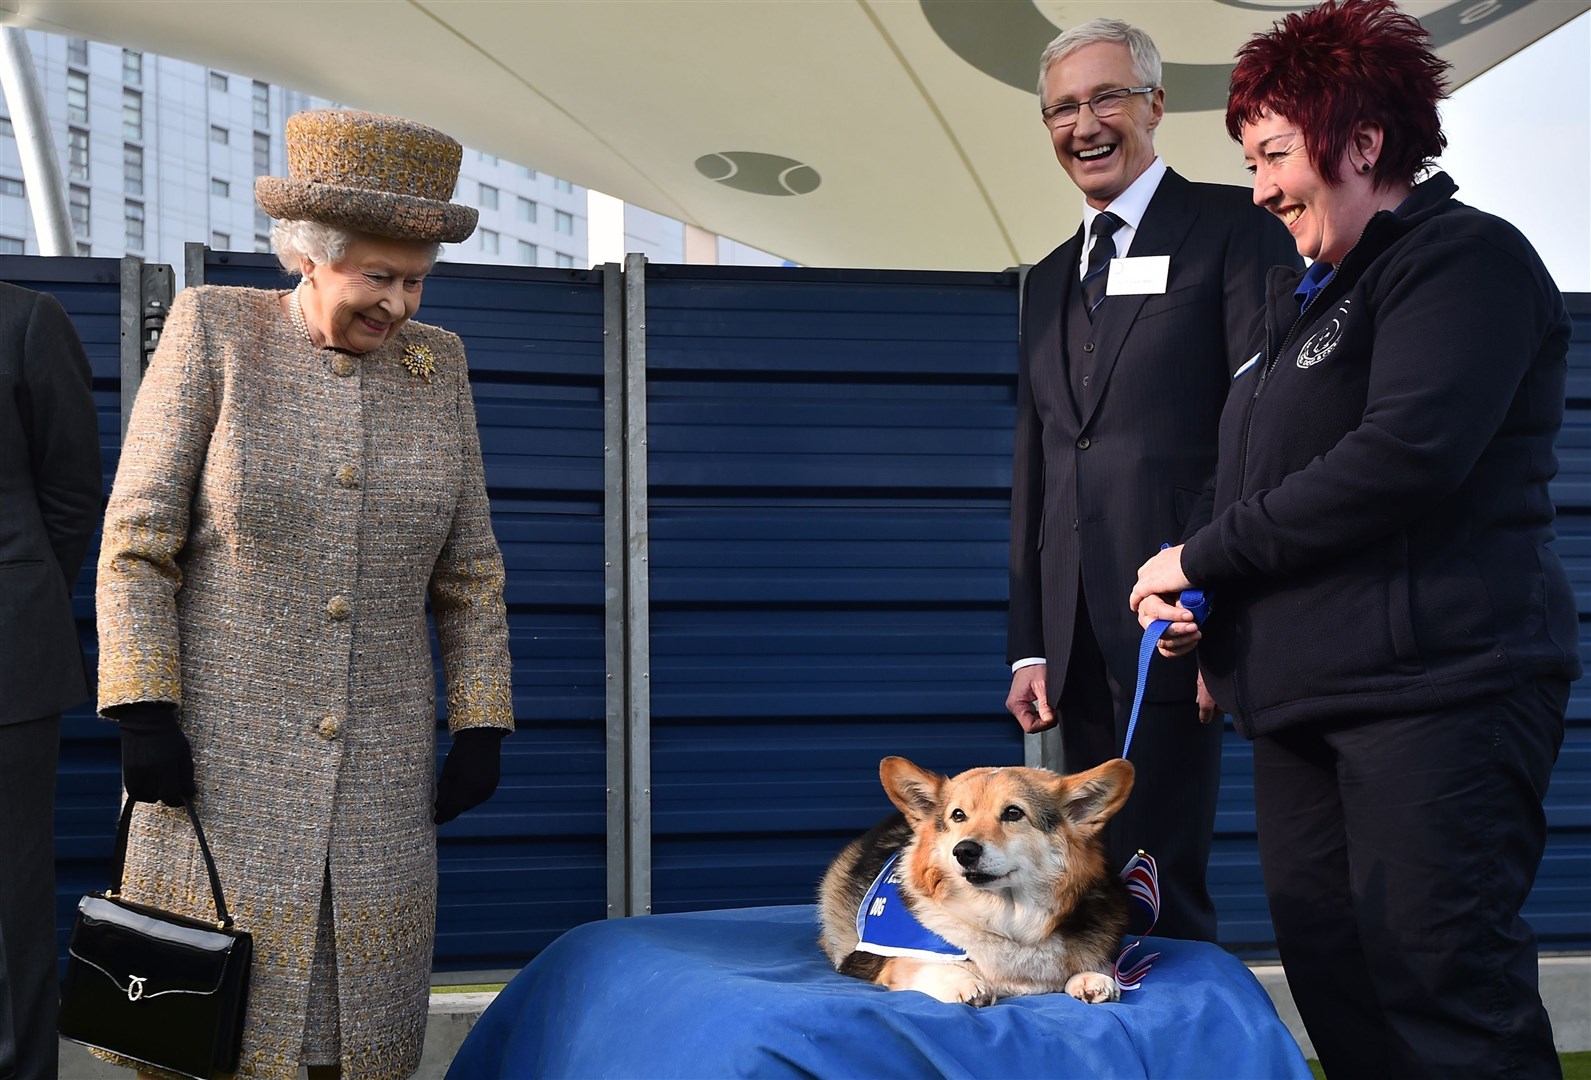 Queen Elizabeth II looking at a Corgi as Paul O’Grady looks on during a visit to Battersea Dogs and Cats Home in London (Ben Stansall/PA)